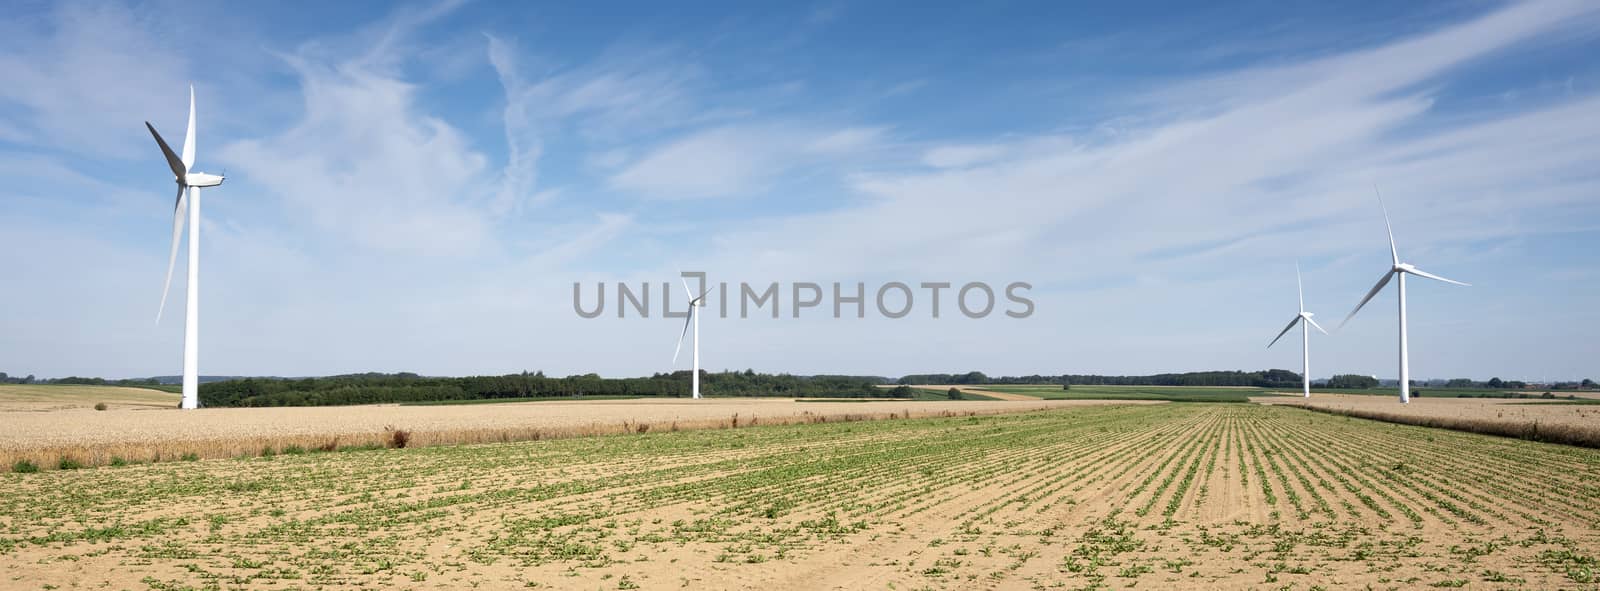 fields and wind turbine in the north of france under blue sky by ahavelaar